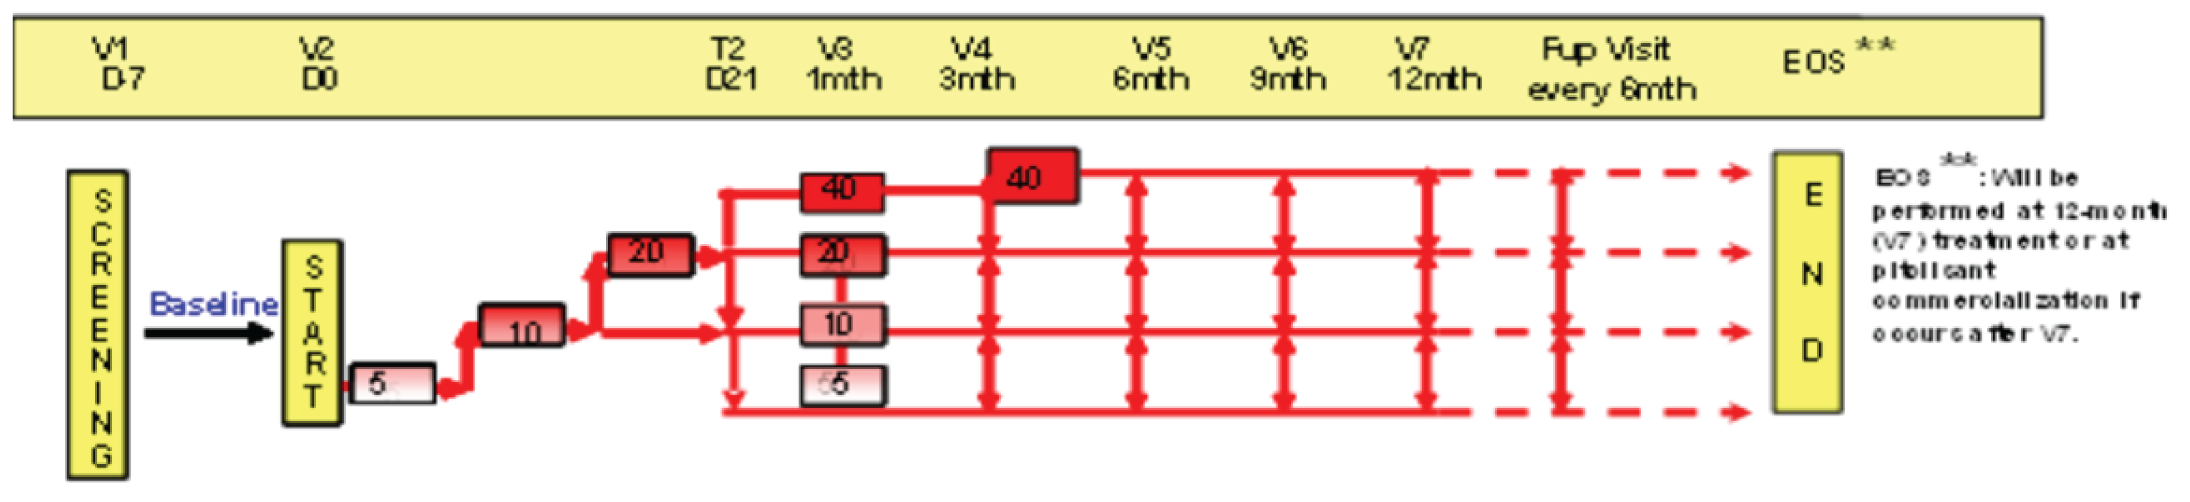 This is a flow chart of naive patients starting the study with a 1-month individual up-titration scheme, starting at 5 mg per day for 7 days, followed by 10 mg per day for 7 days. After 14 days, the dose could be increased to 20 mg per day. At 1 month, the daily dose could be adjusted again to 5 mg, 10 mg, 20 mg, or 40 mg. This dose remained stable for a 2-month period. For all patients, daily dose adjustments could occur again at the 3-month, 6-month, 9-month, and 12-month visits to 5 mg, 10 mg, 20 mg, or 40 mg.